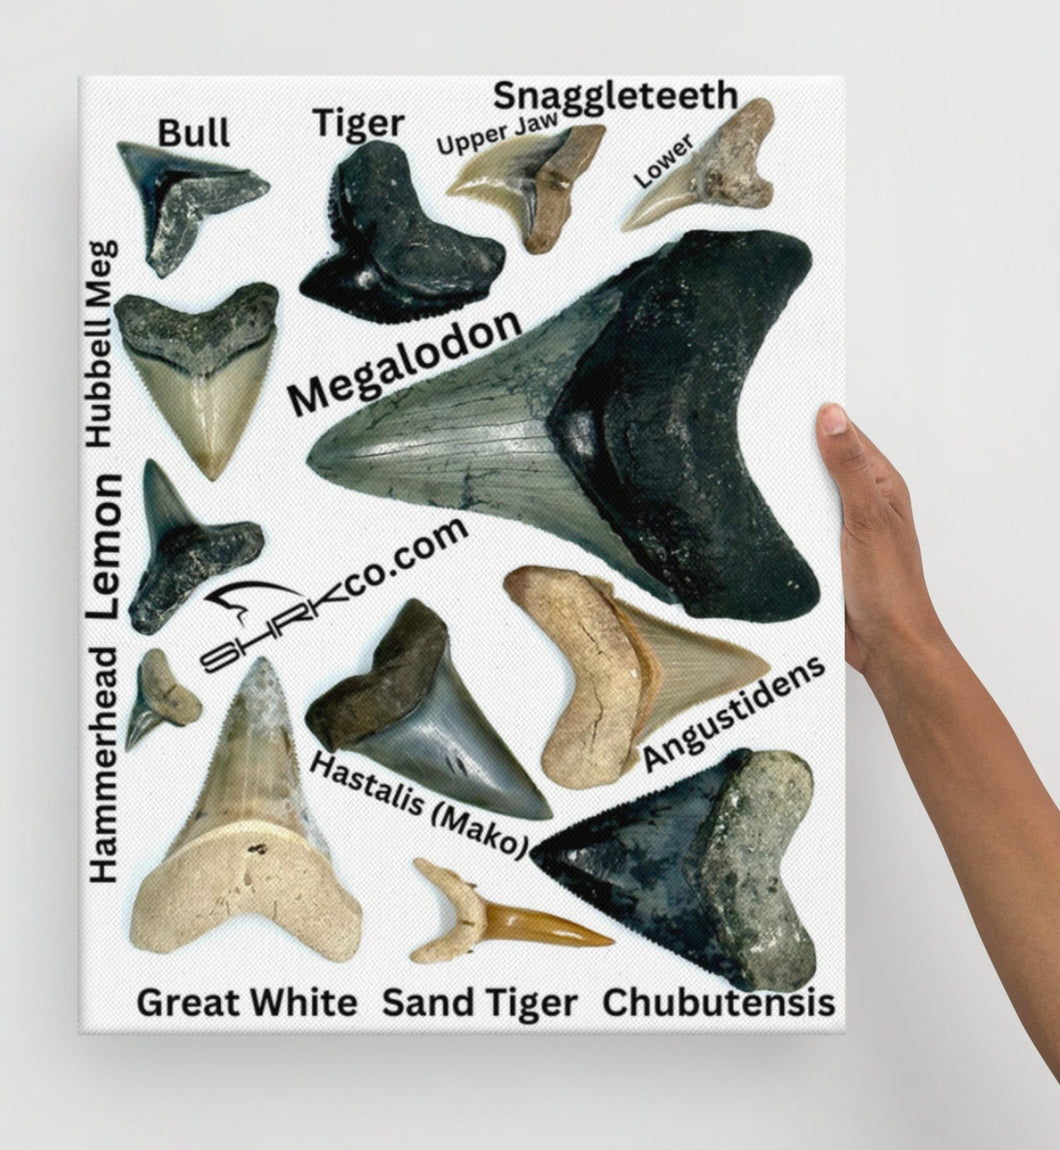 Common and uncommon shark tooth species of Florida and South Carolina.  Features Sharks Teeth examples from a Bull, Tiger, Snaggletooth (Hemipristis Serra), Megalodon, Hubbell Meg, Lemon, Great Hammerhead, Hastalis (commonly called Mako as a slang term), Angustidens, Chubutensis, Great White and Sand Tiger